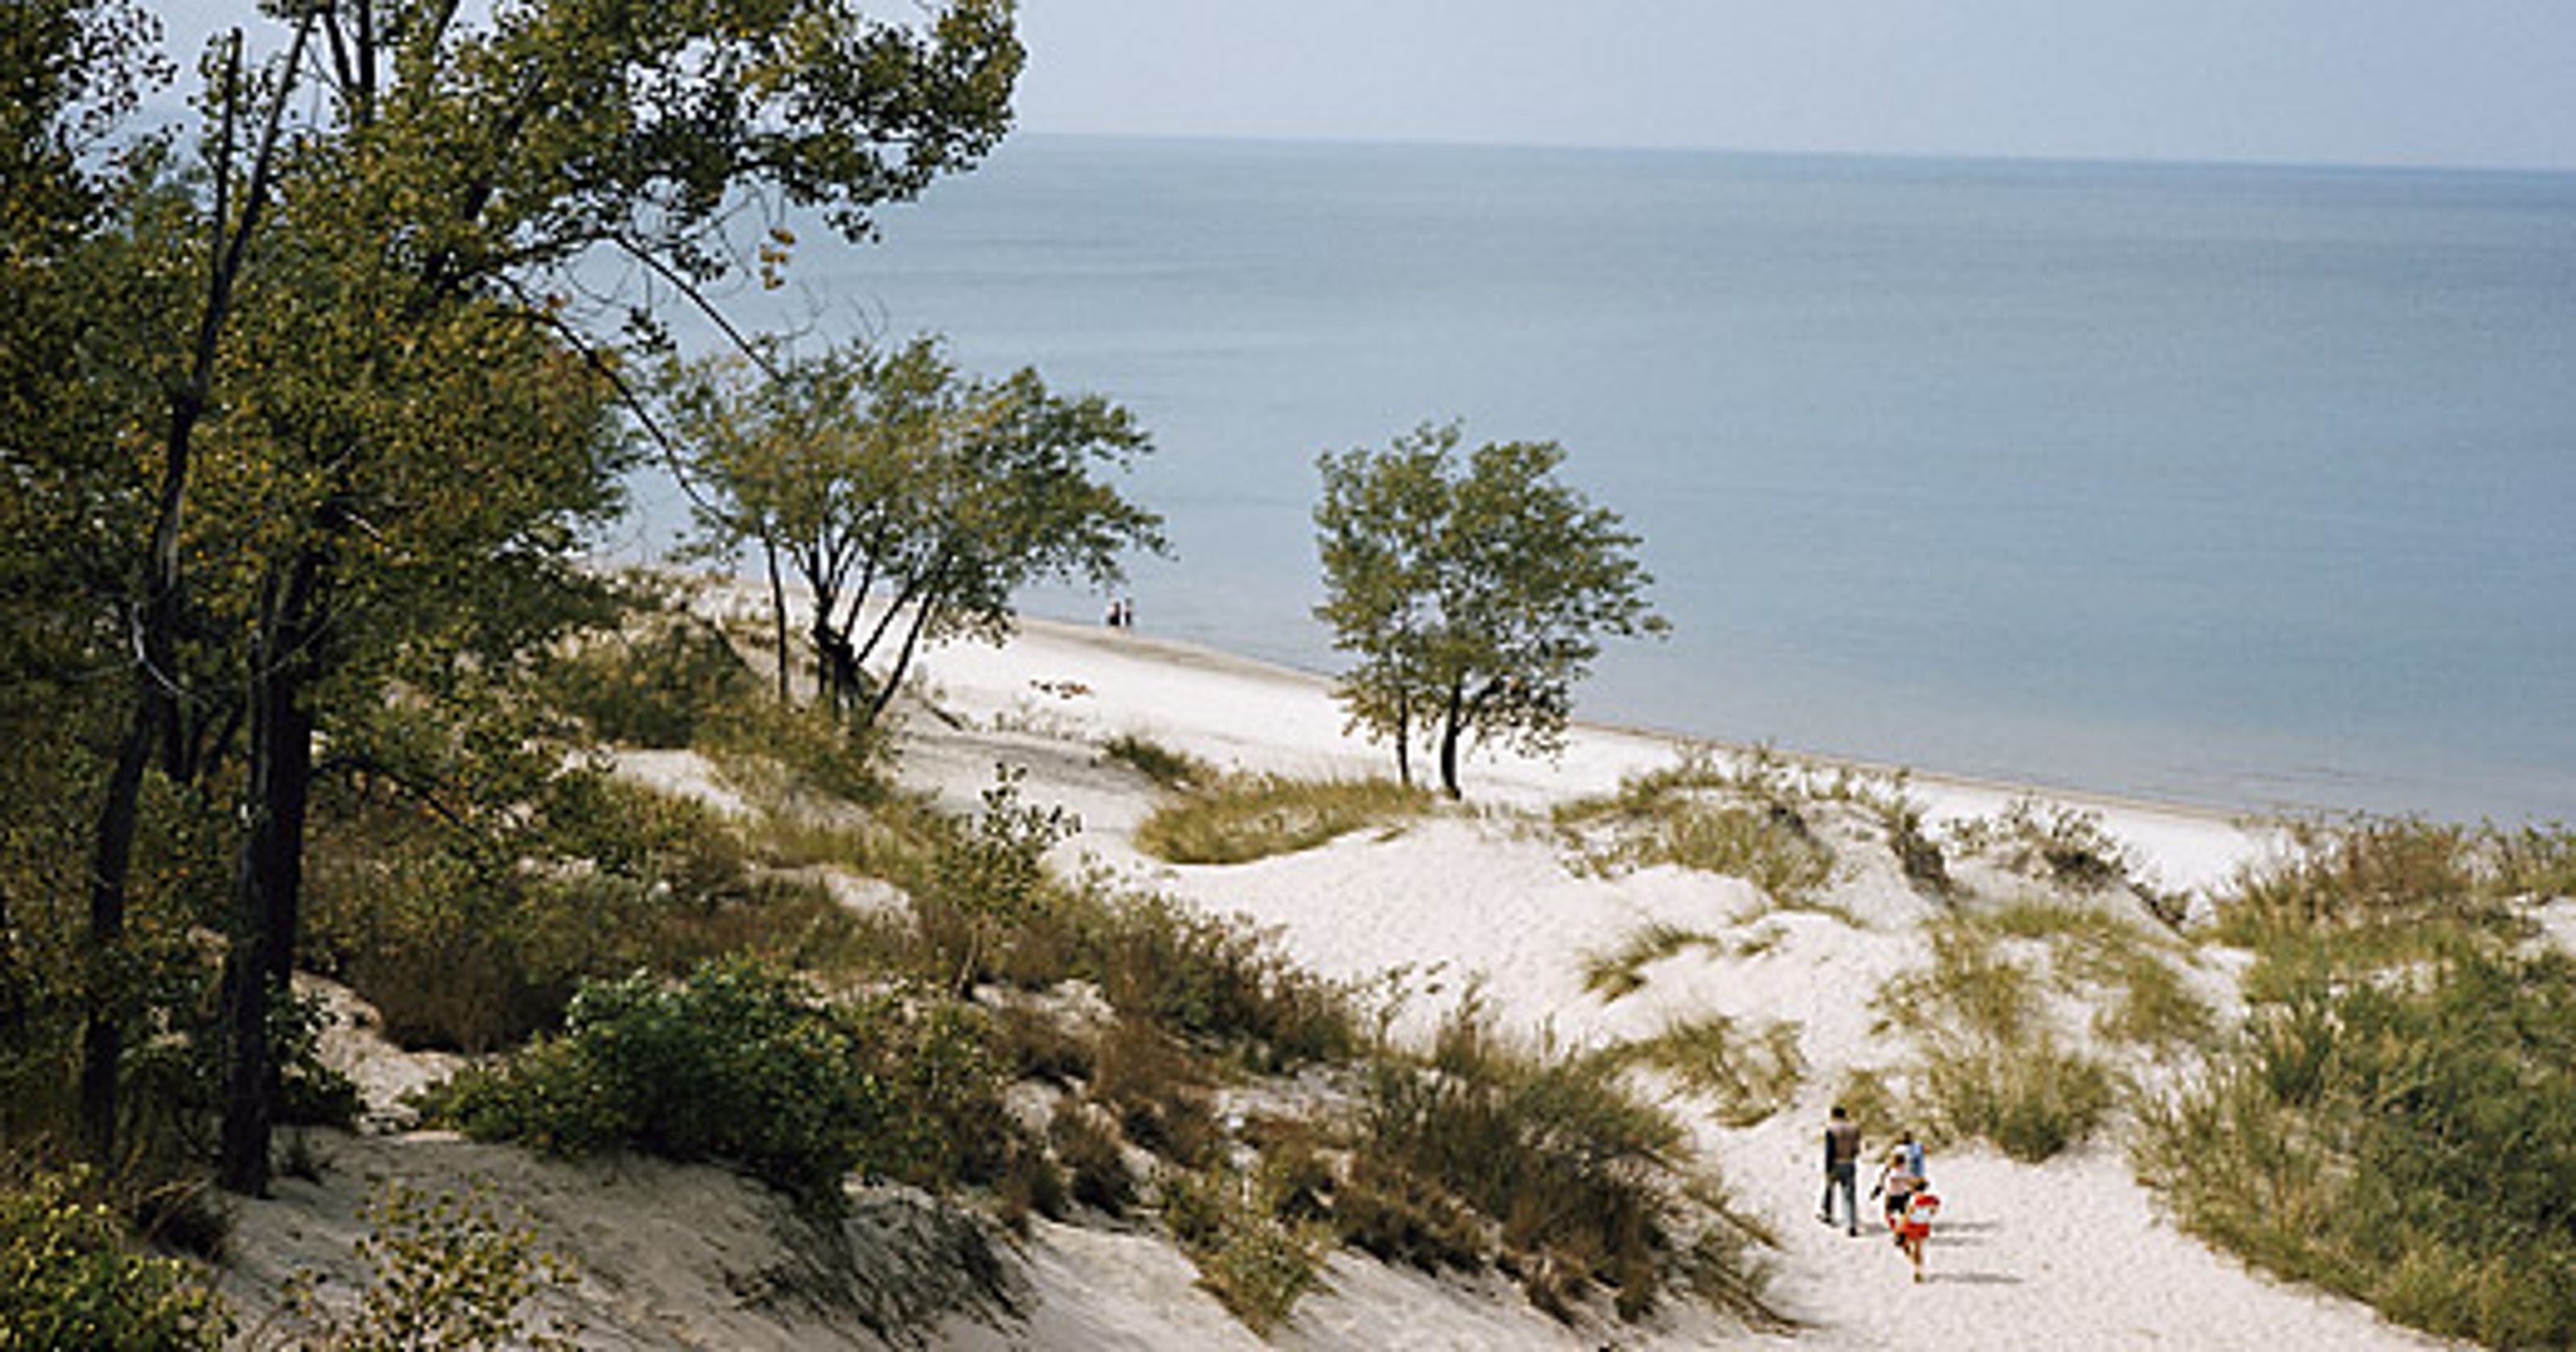 10 glorious Indiana camp sites to pitch a tent